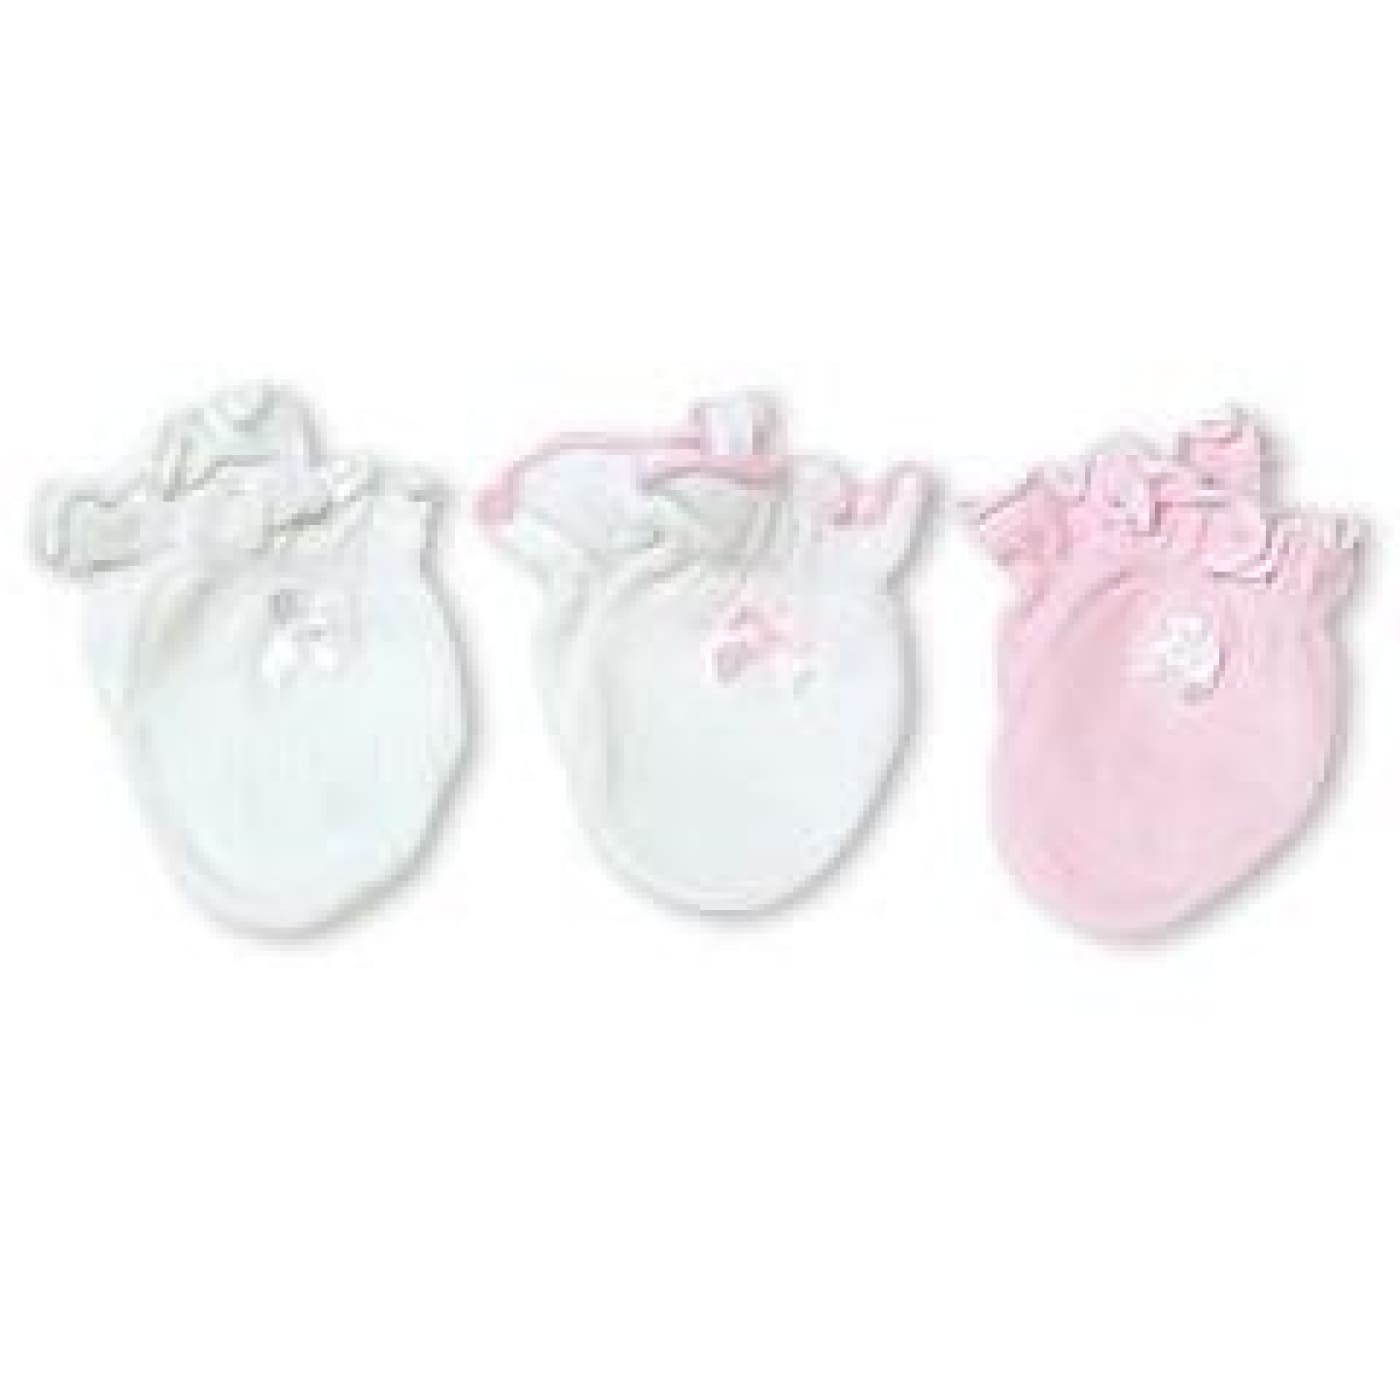 Playette Preemie Mittens - Pink/White 3PK - Prem / Pink/White - BABY & TODDLER CLOTHING - MITTENS/SOCKS/SHOES